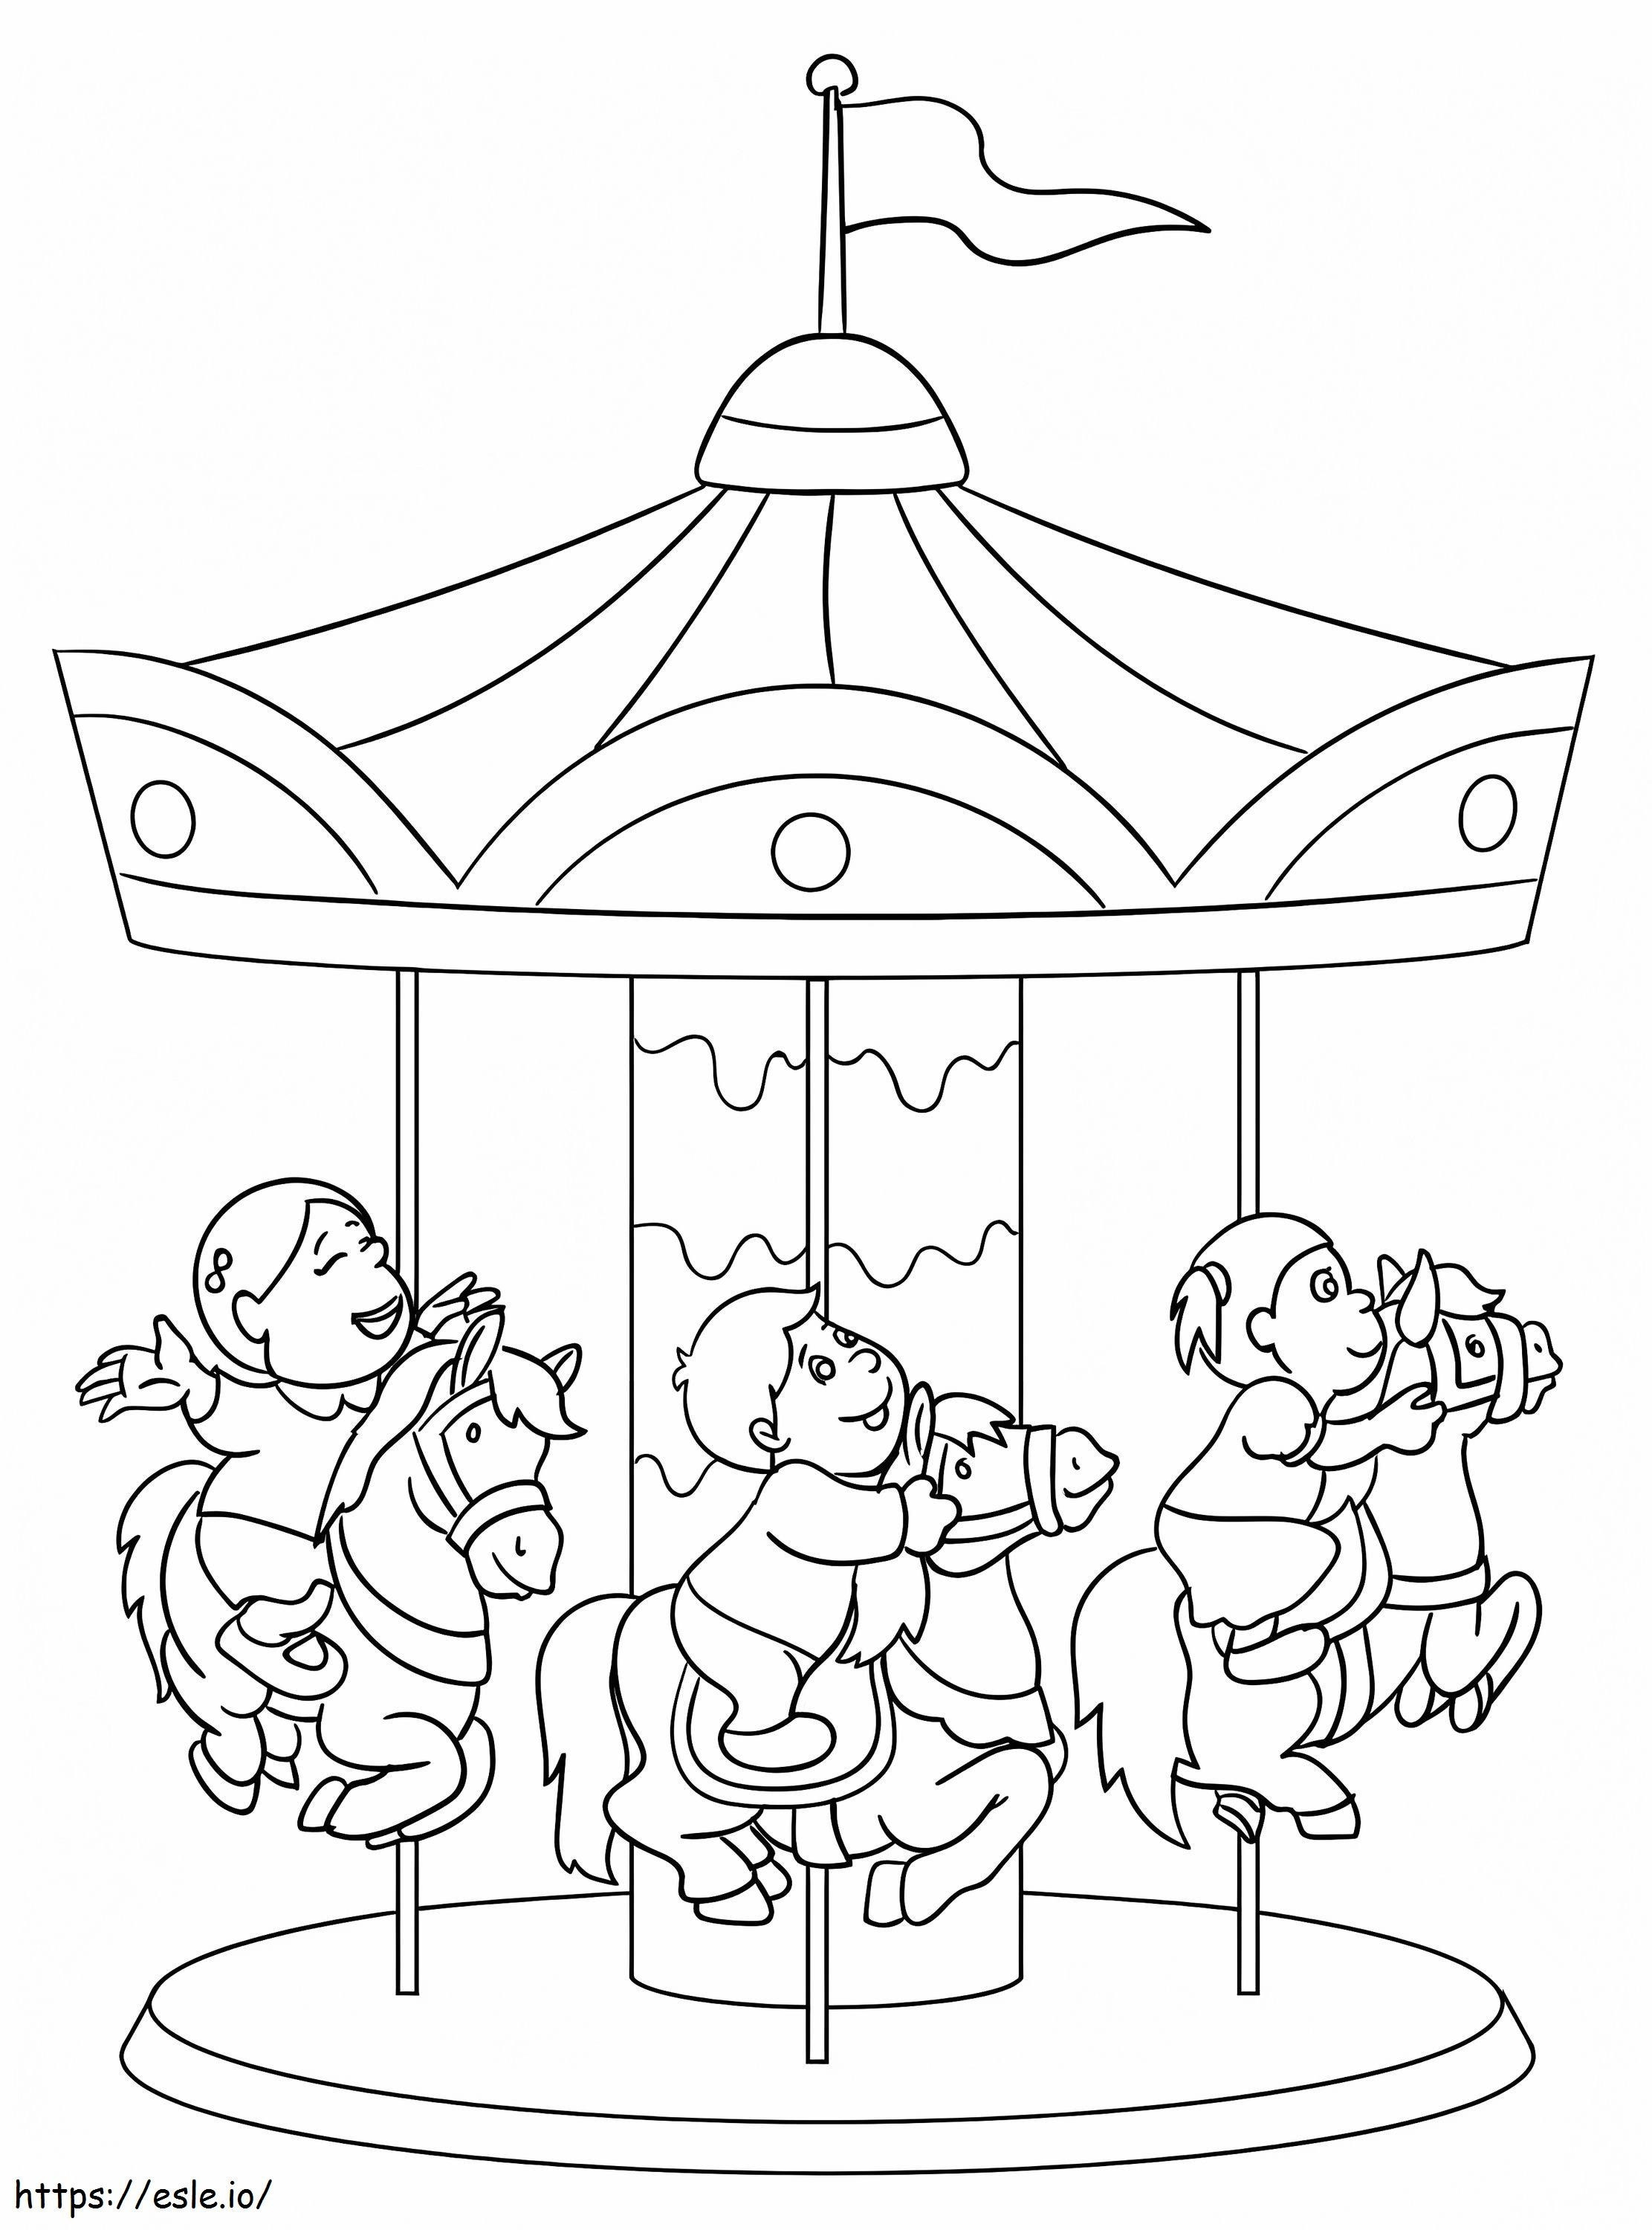 Children On Carousel coloring page